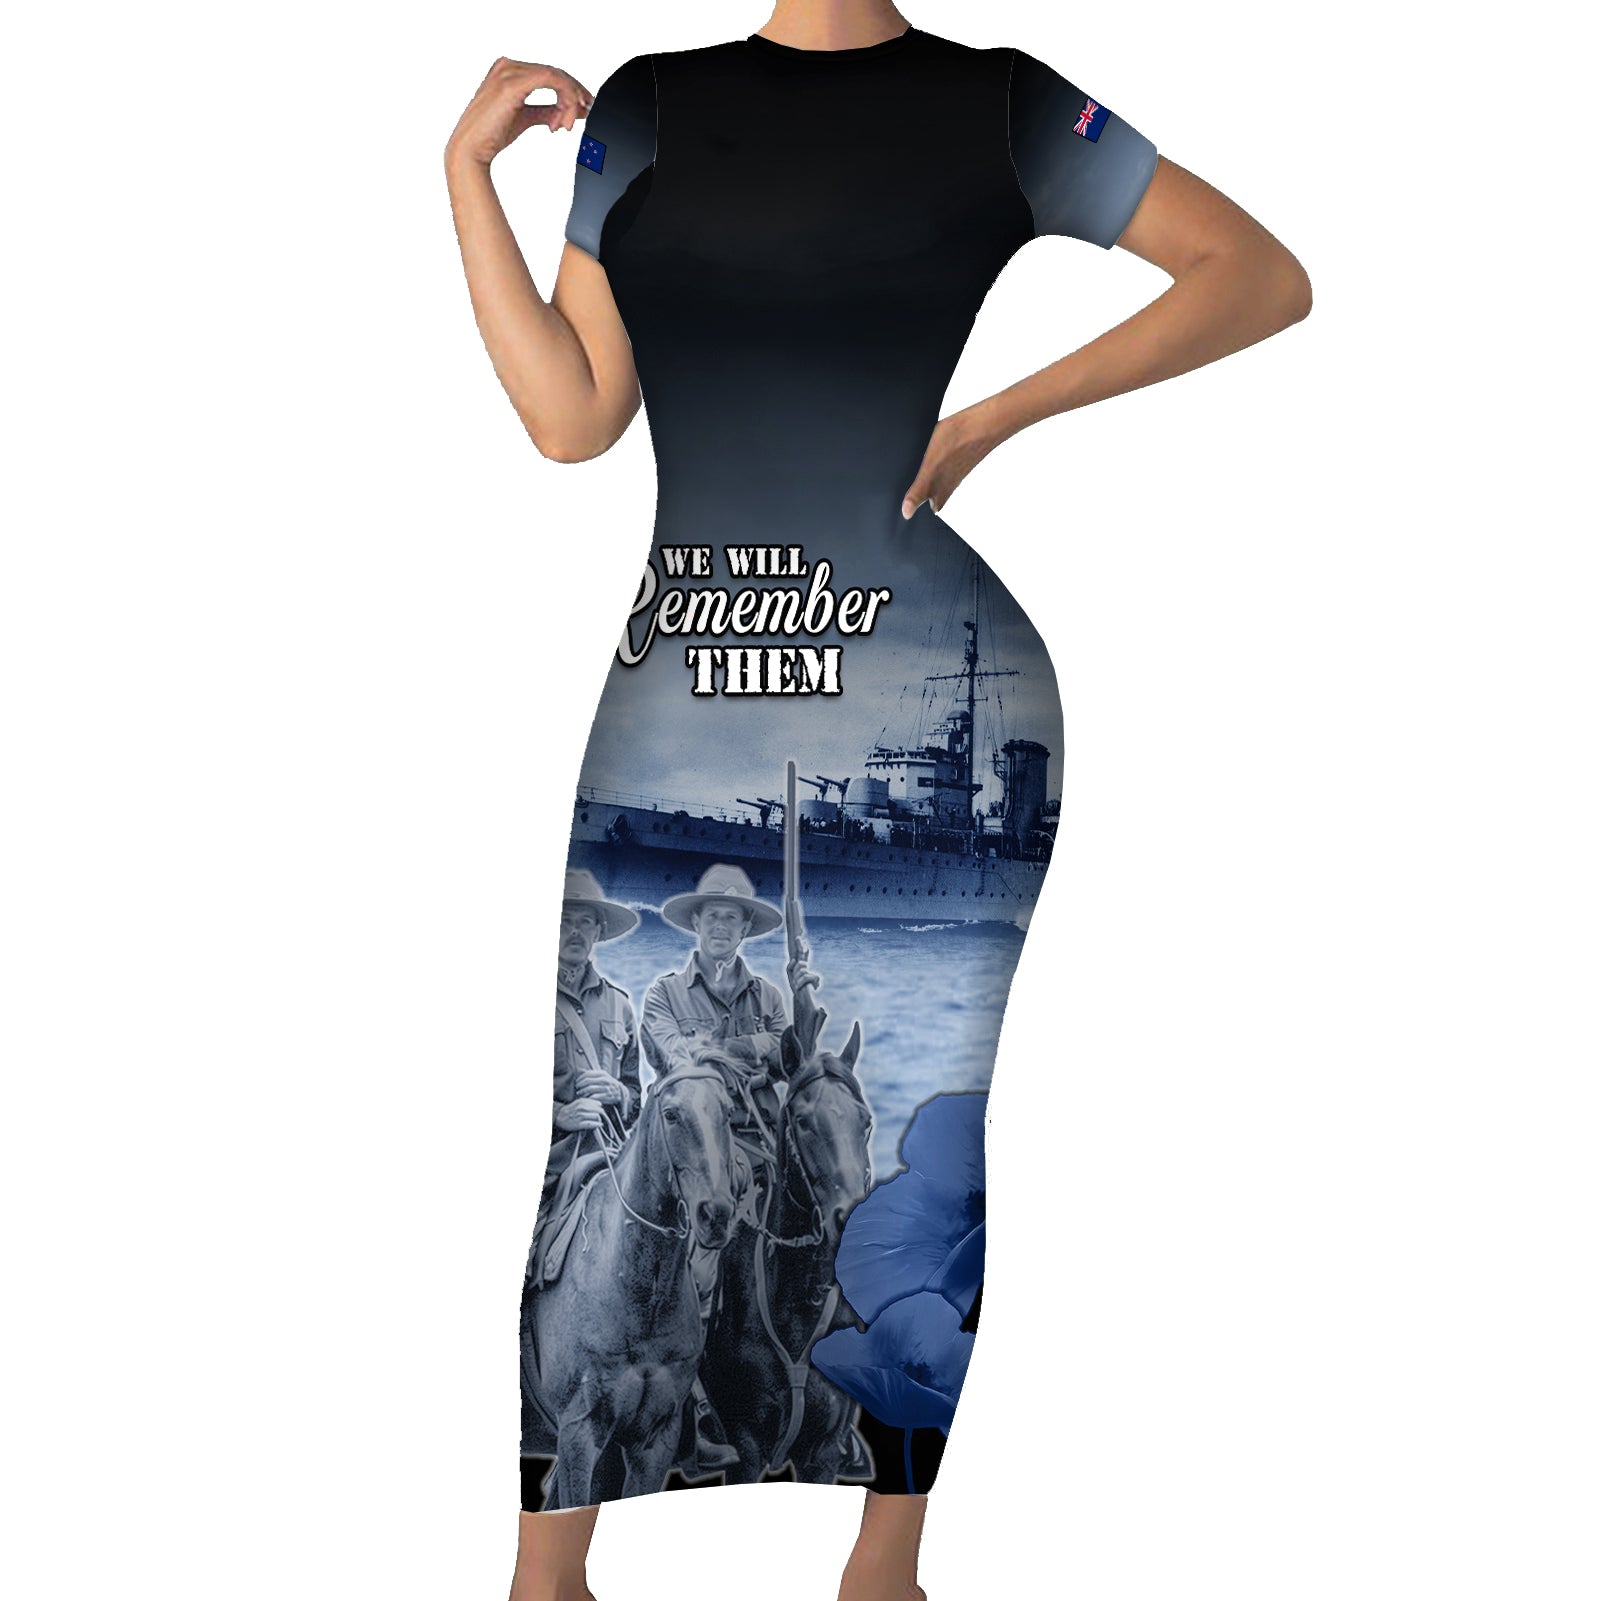 New Zealand ANZAC Day Short Sleeve Bodycon Dress HMNZS Achilles We Will Remember Them LT05 Long Dress Blue - Polynesian Pride